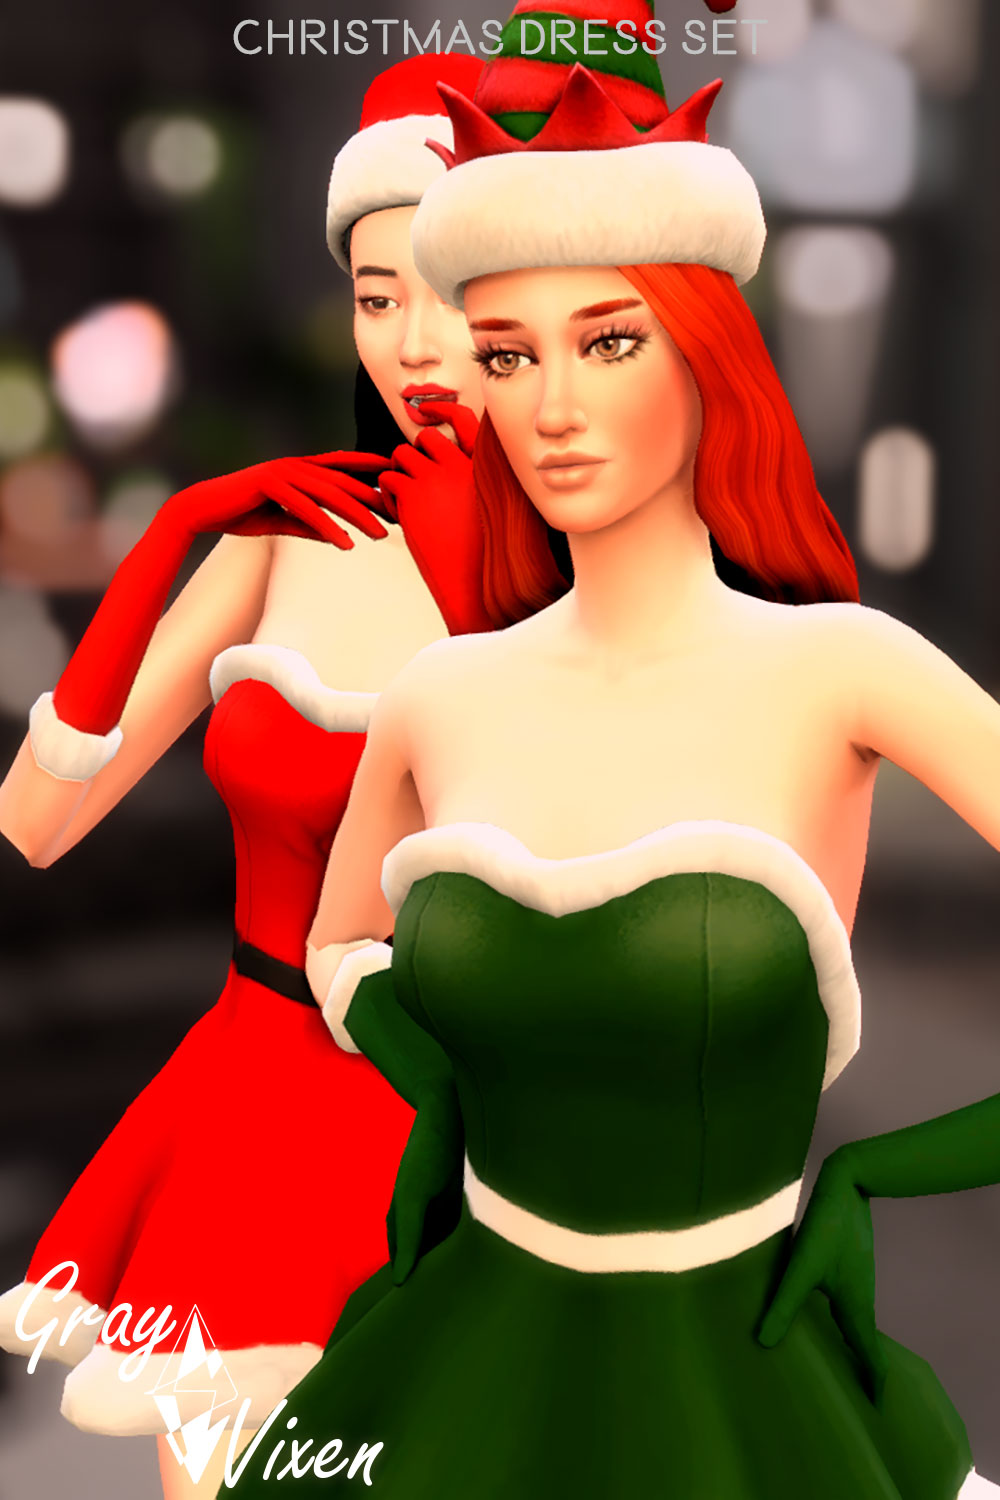 wicked whims sims 4 mod download